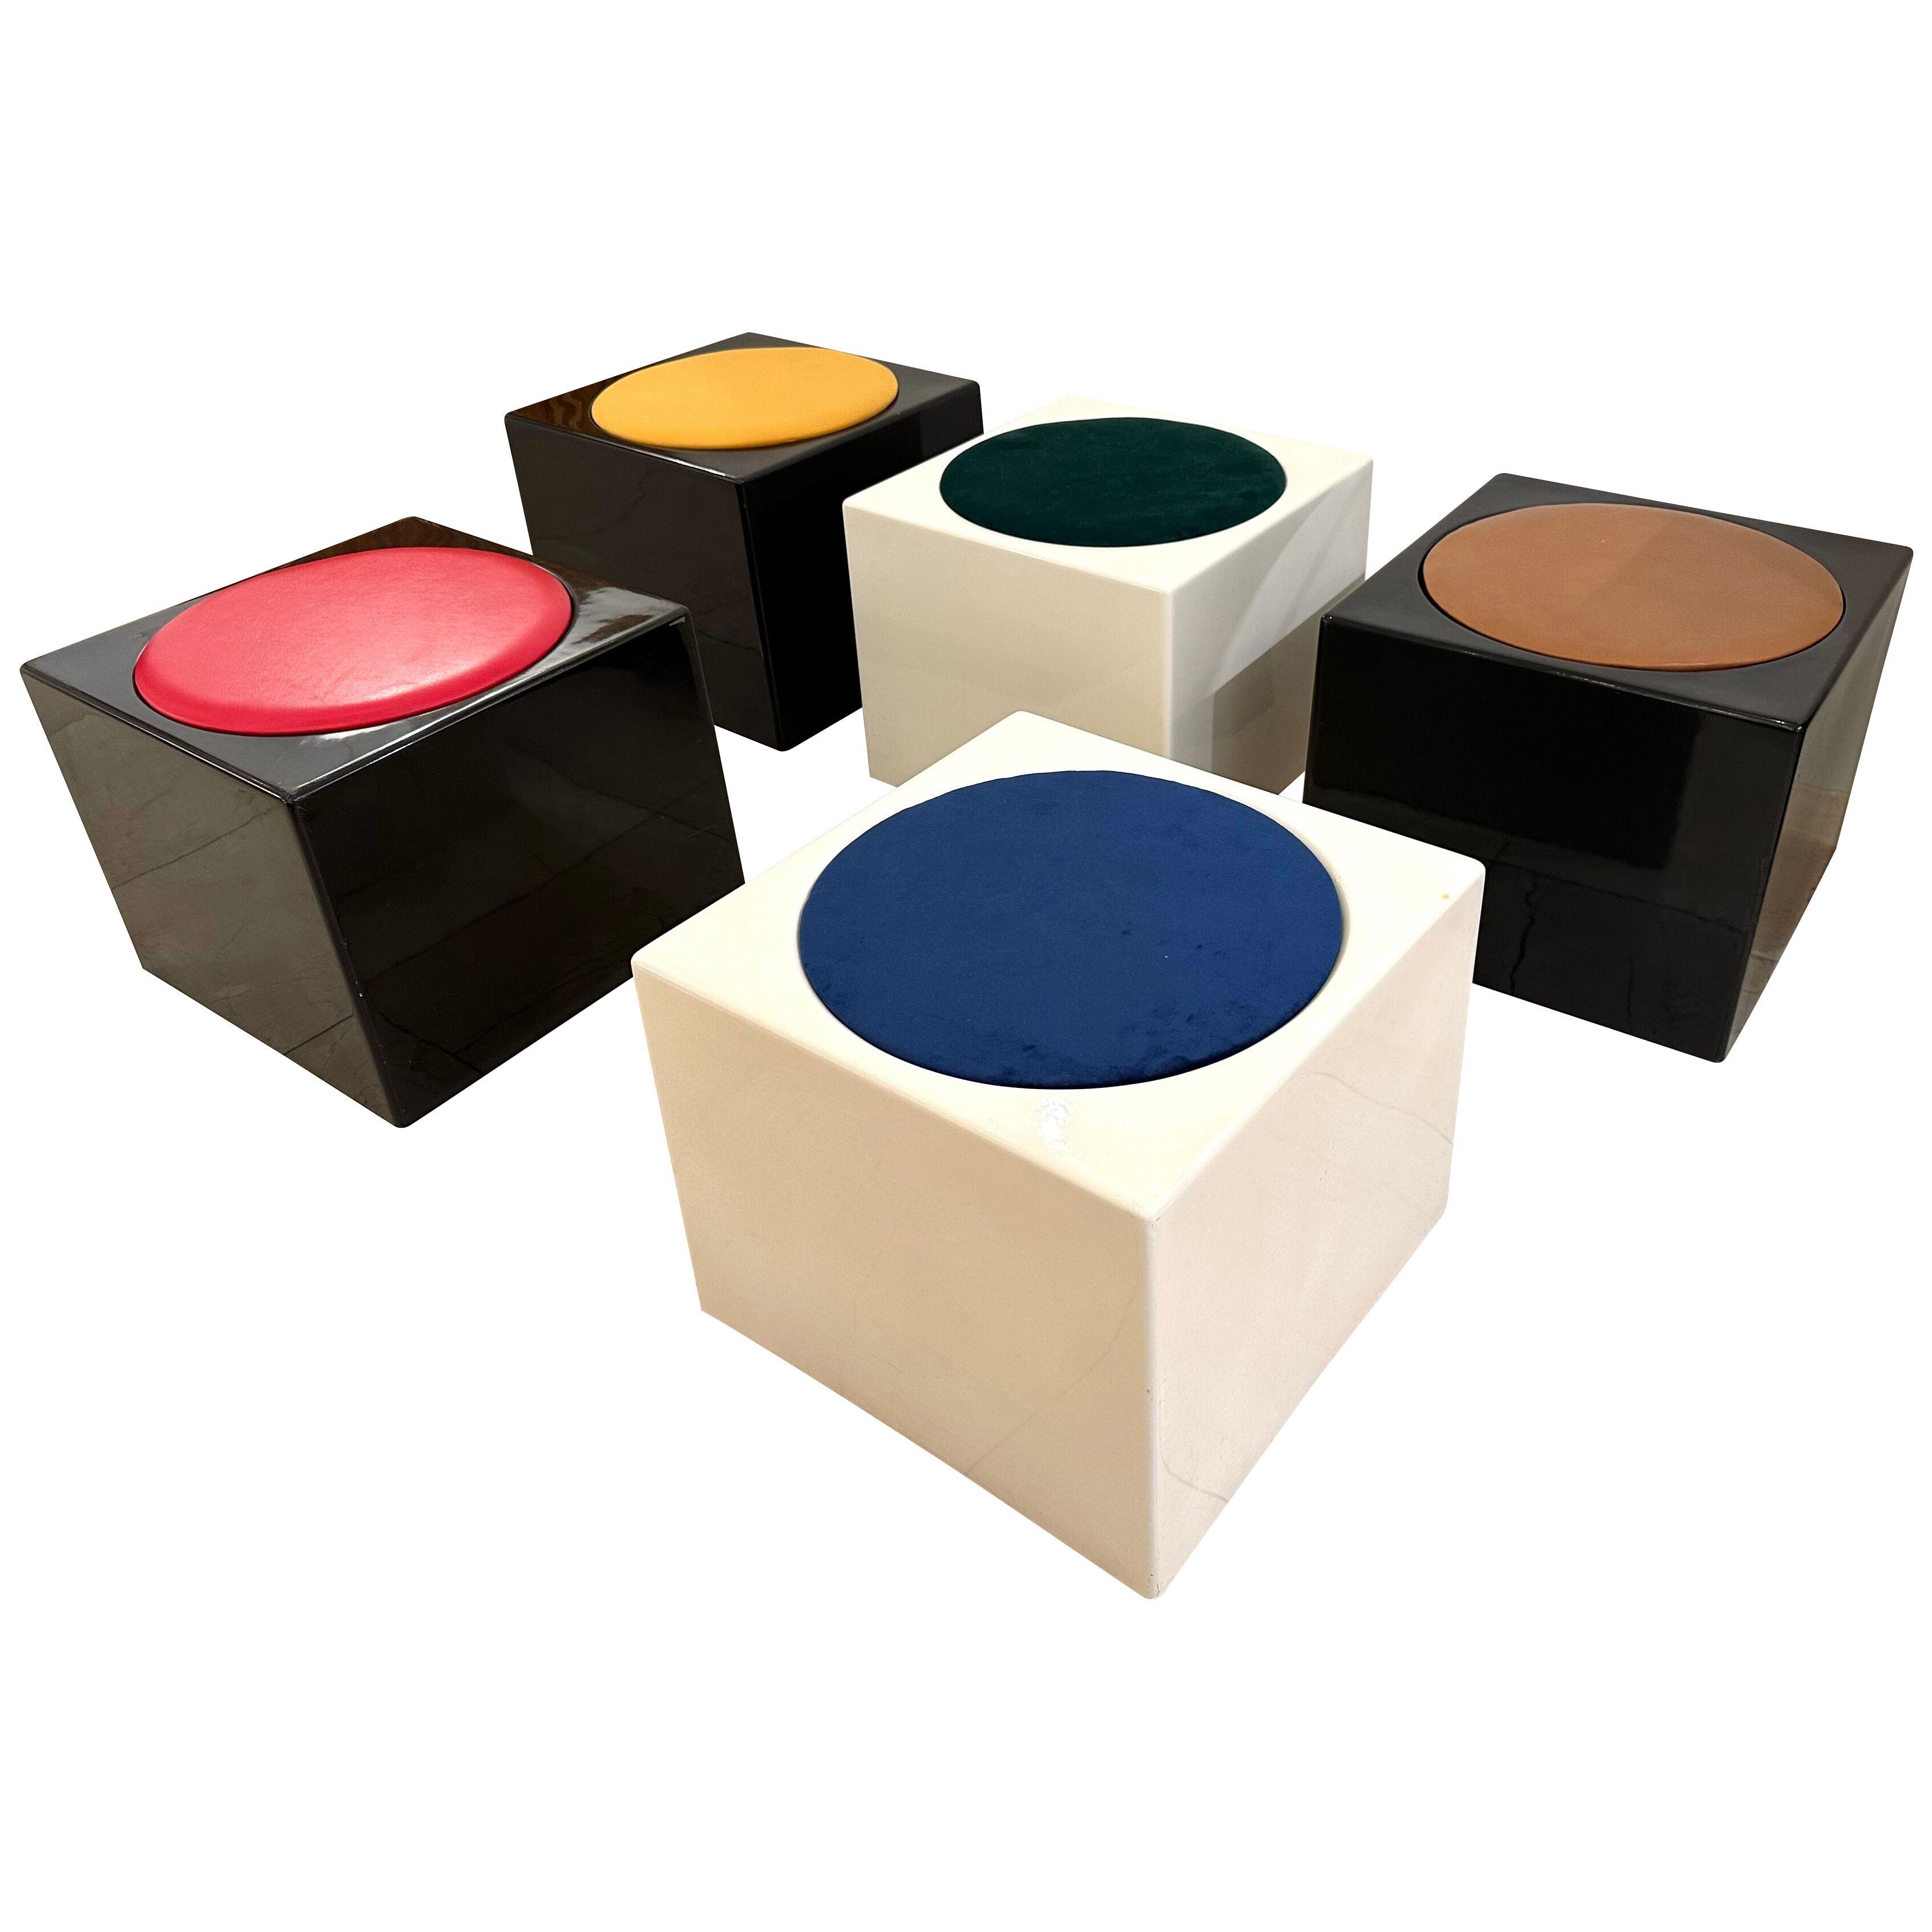 Set of 5 Cube Stools Il Kubile by MIM Roma. Italy, 1970s